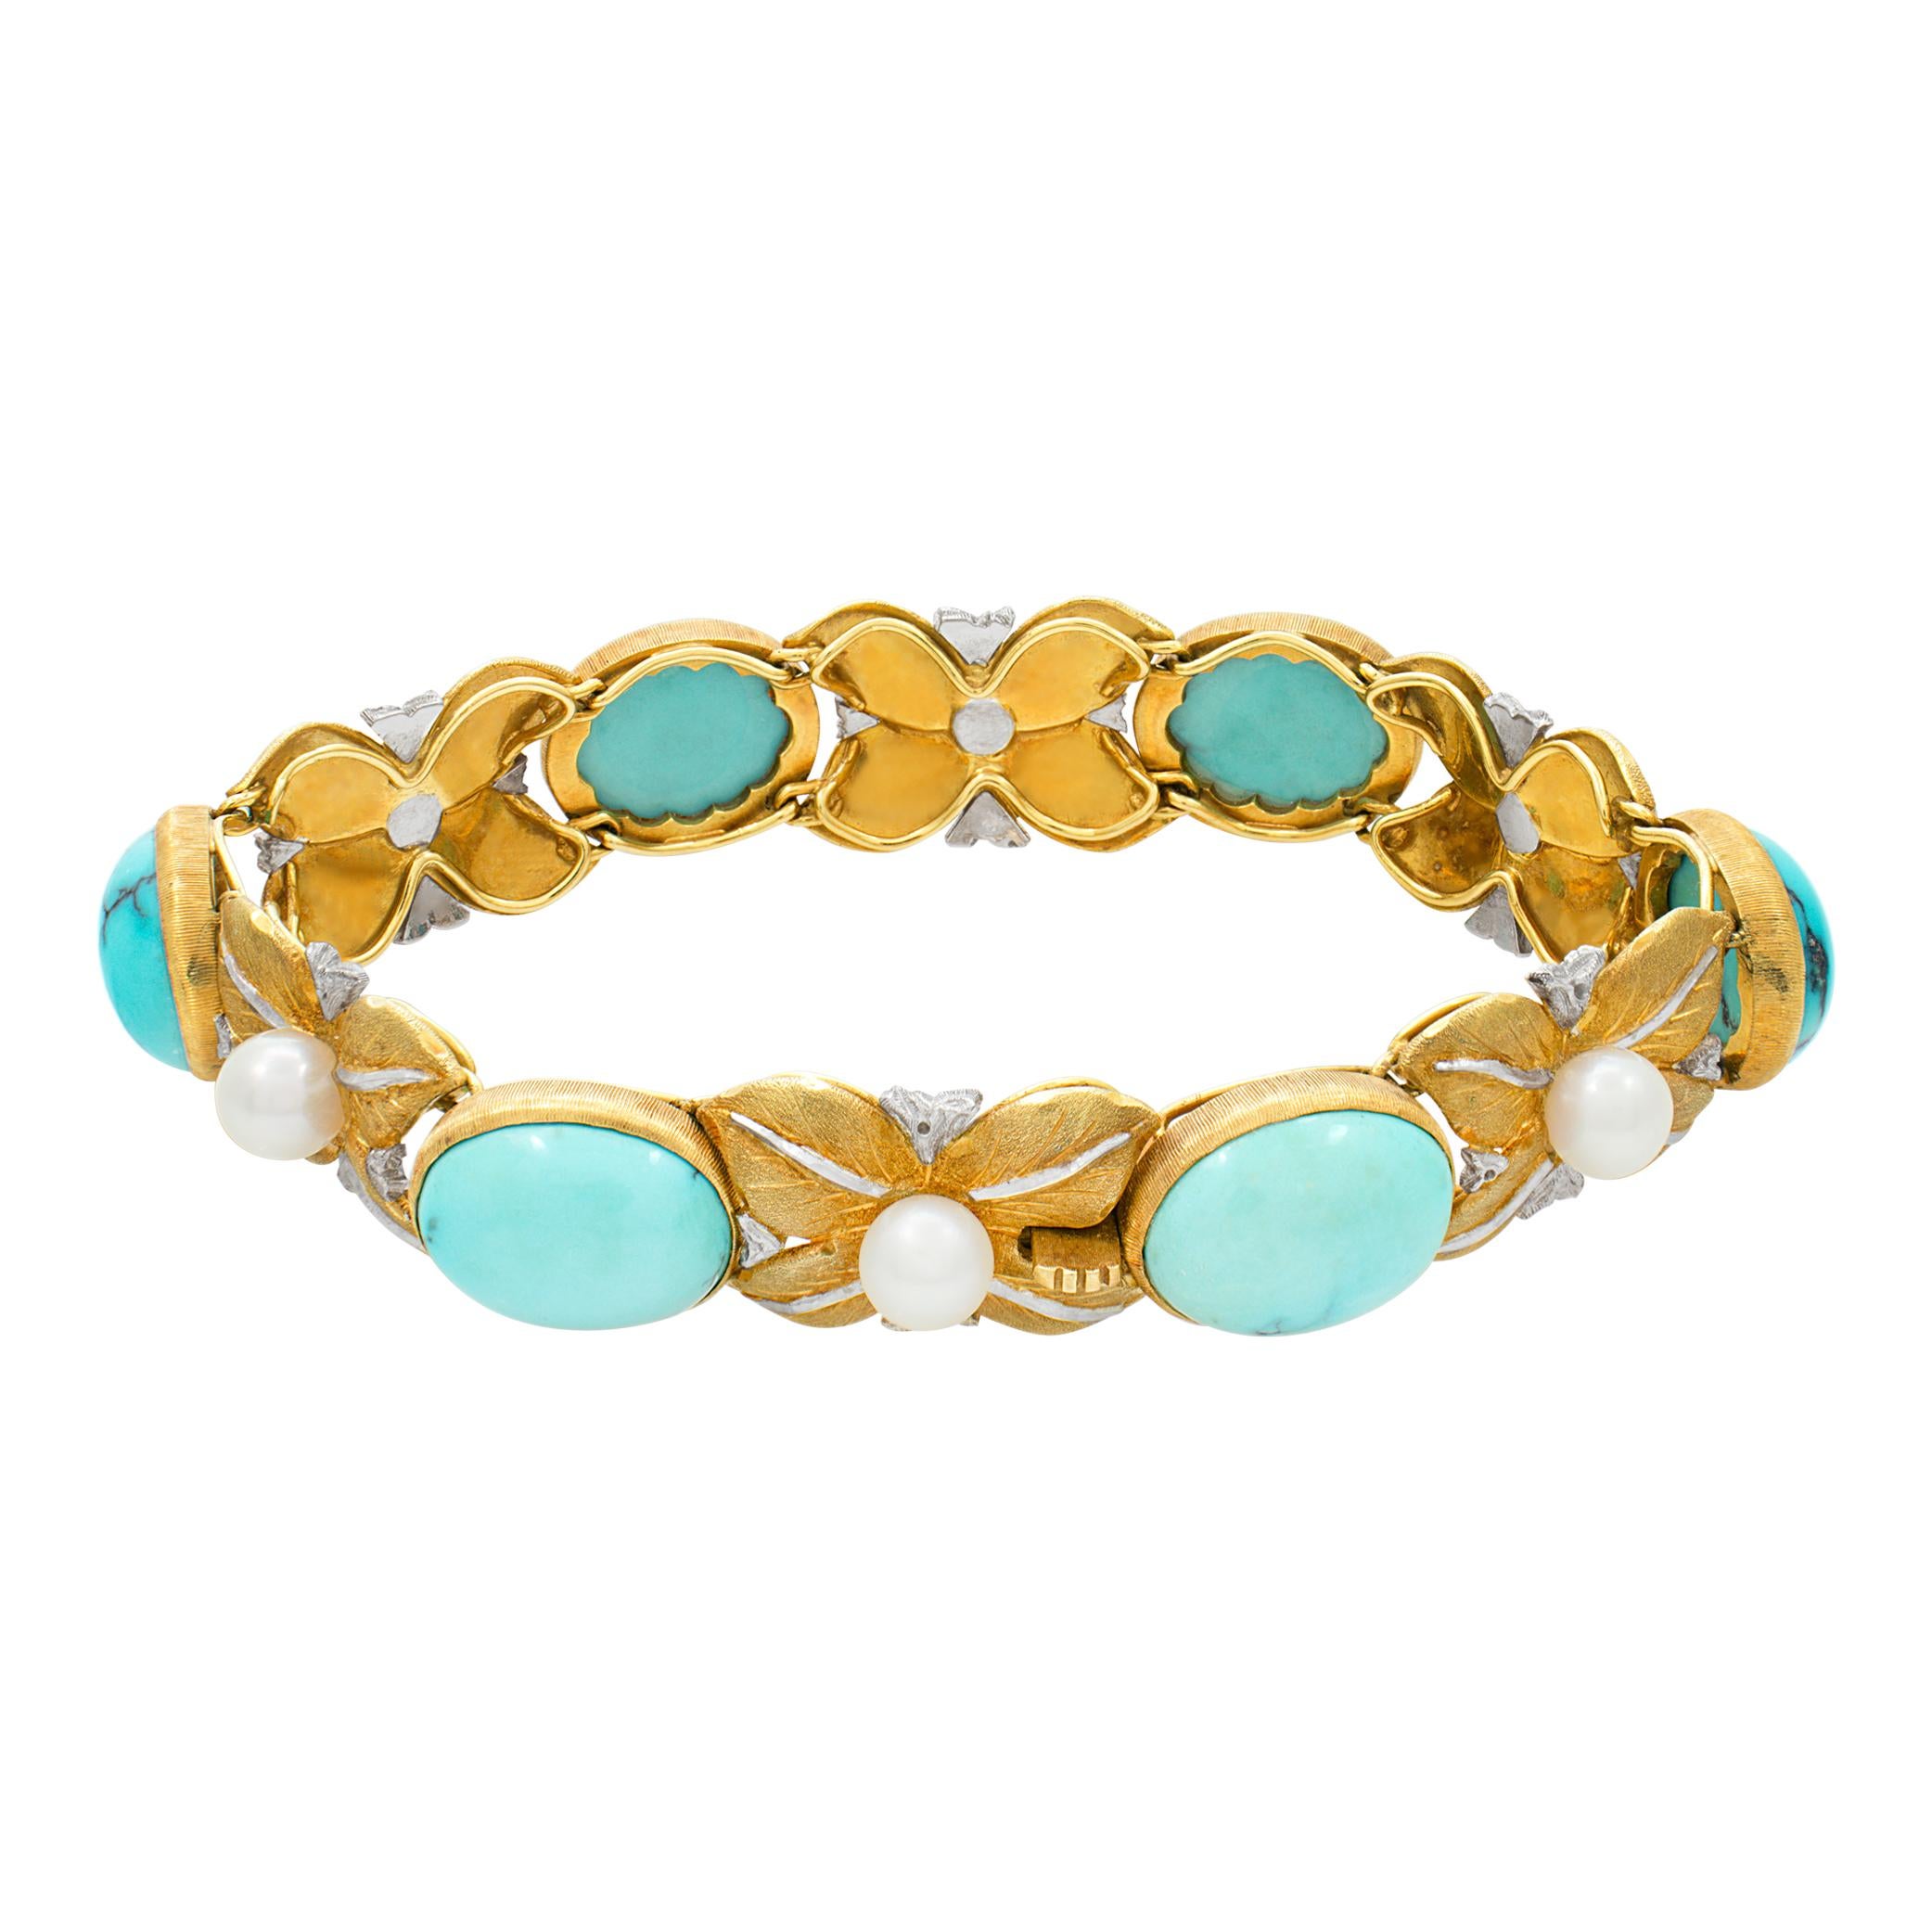 Buccellatti Leaf Motif Pearl and Turquoise Bracelet in 18k In Excellent Condition For Sale In Surfside, FL